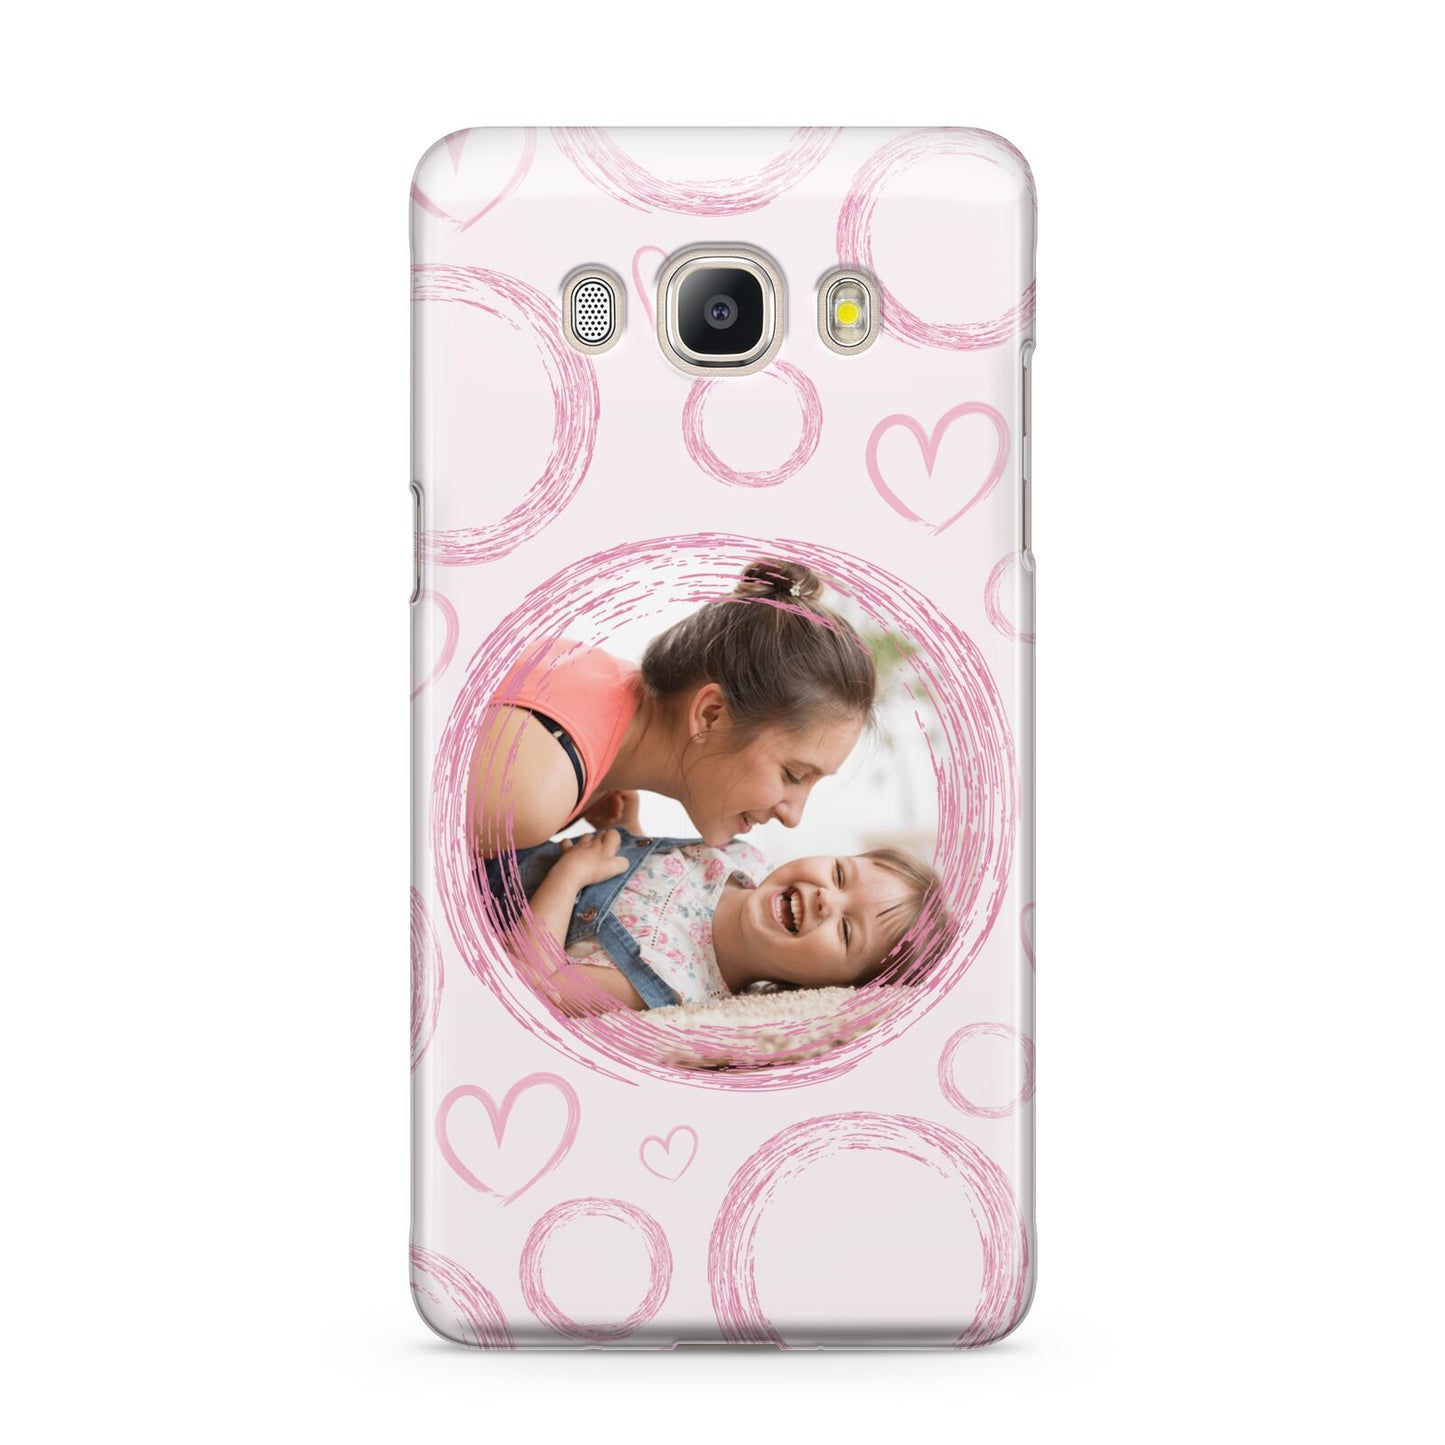 Pink Love Hearts Photo Personalised Samsung Galaxy J5 2016 Case